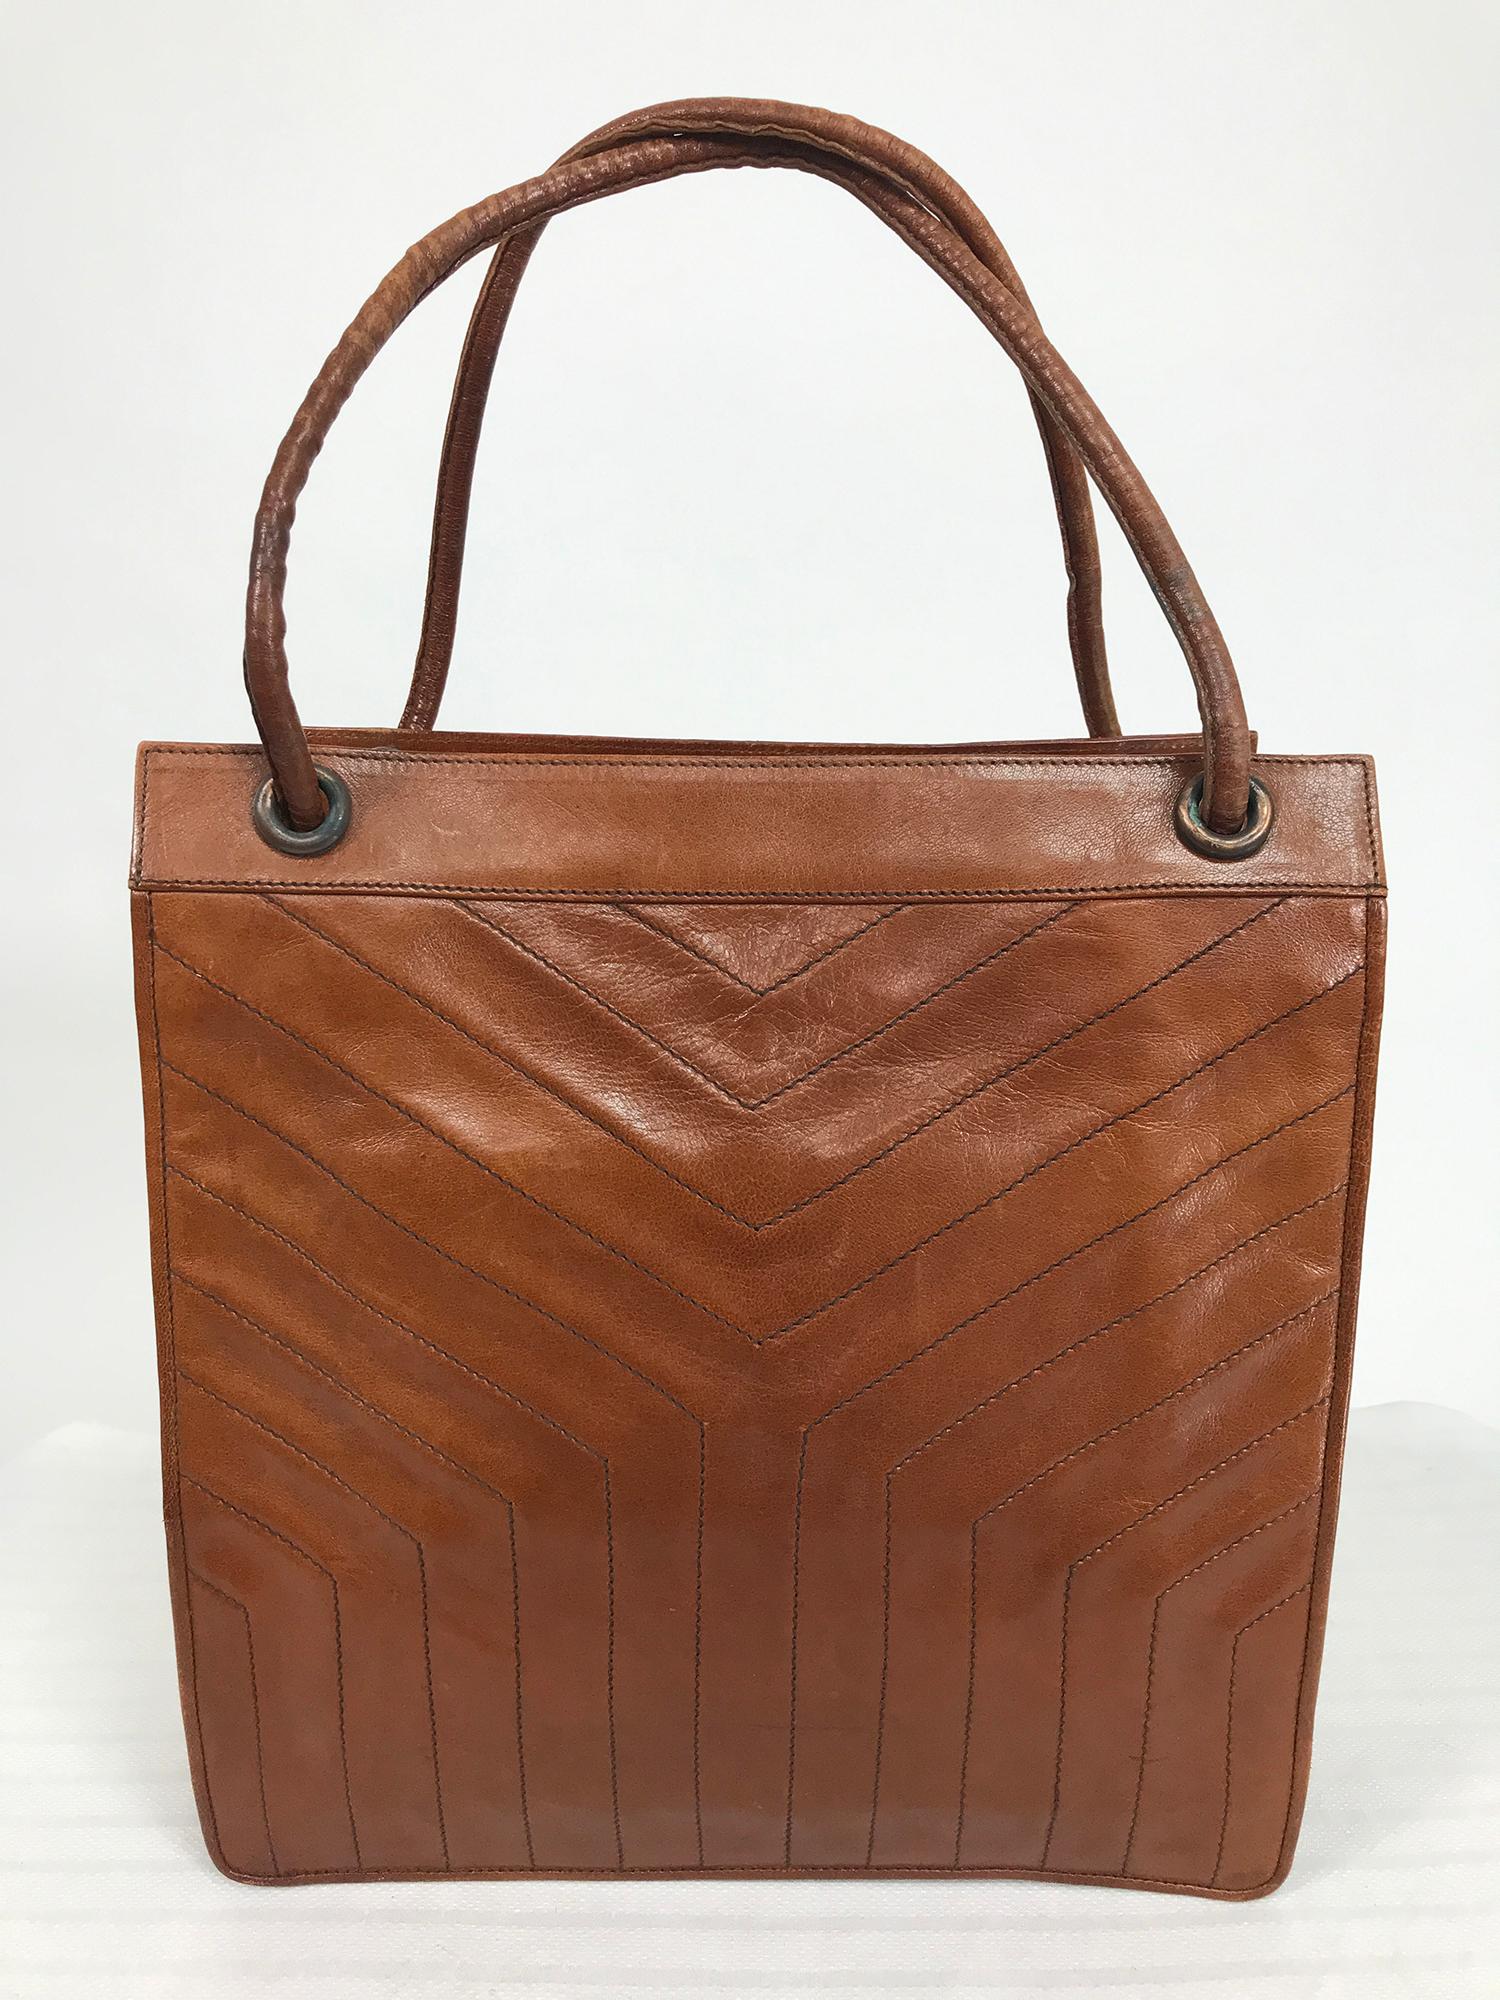 Vintage Yves Saint Laurent caramel leather hand/tote bag from the 1970s. Hand or tote bag in soft glazed caramel colour leather, the front and back are a stitched quilted design, the round padded handle can be carried as a single strap or a double